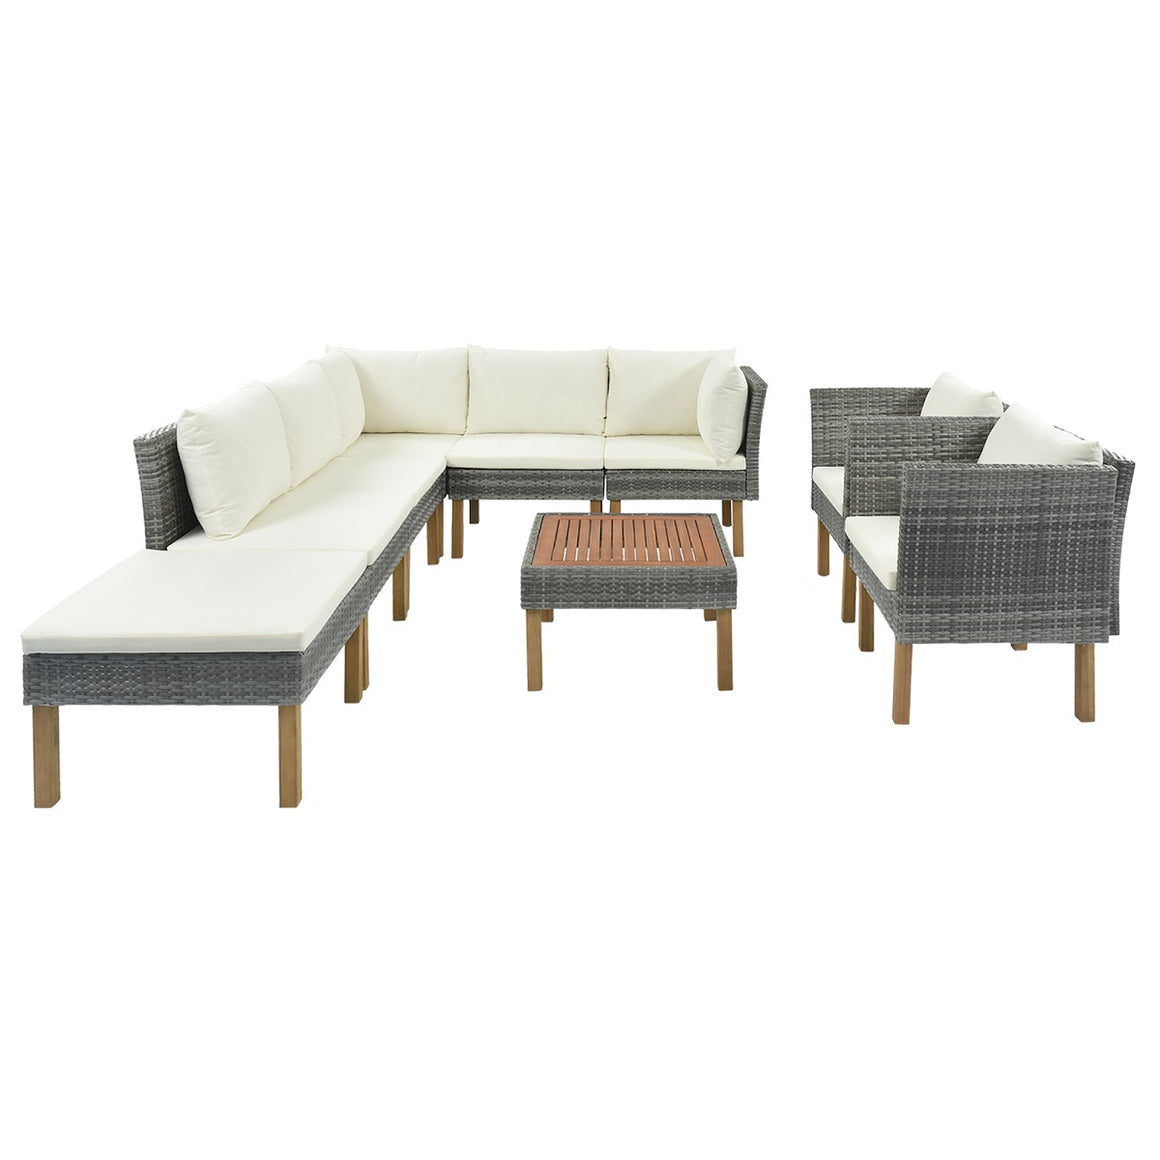 Fablise 9-Piece Outdoor Patio Garden Wicker Sofa Set with Armchairs with Ivory Cushions and Acacia Wood Tabletop